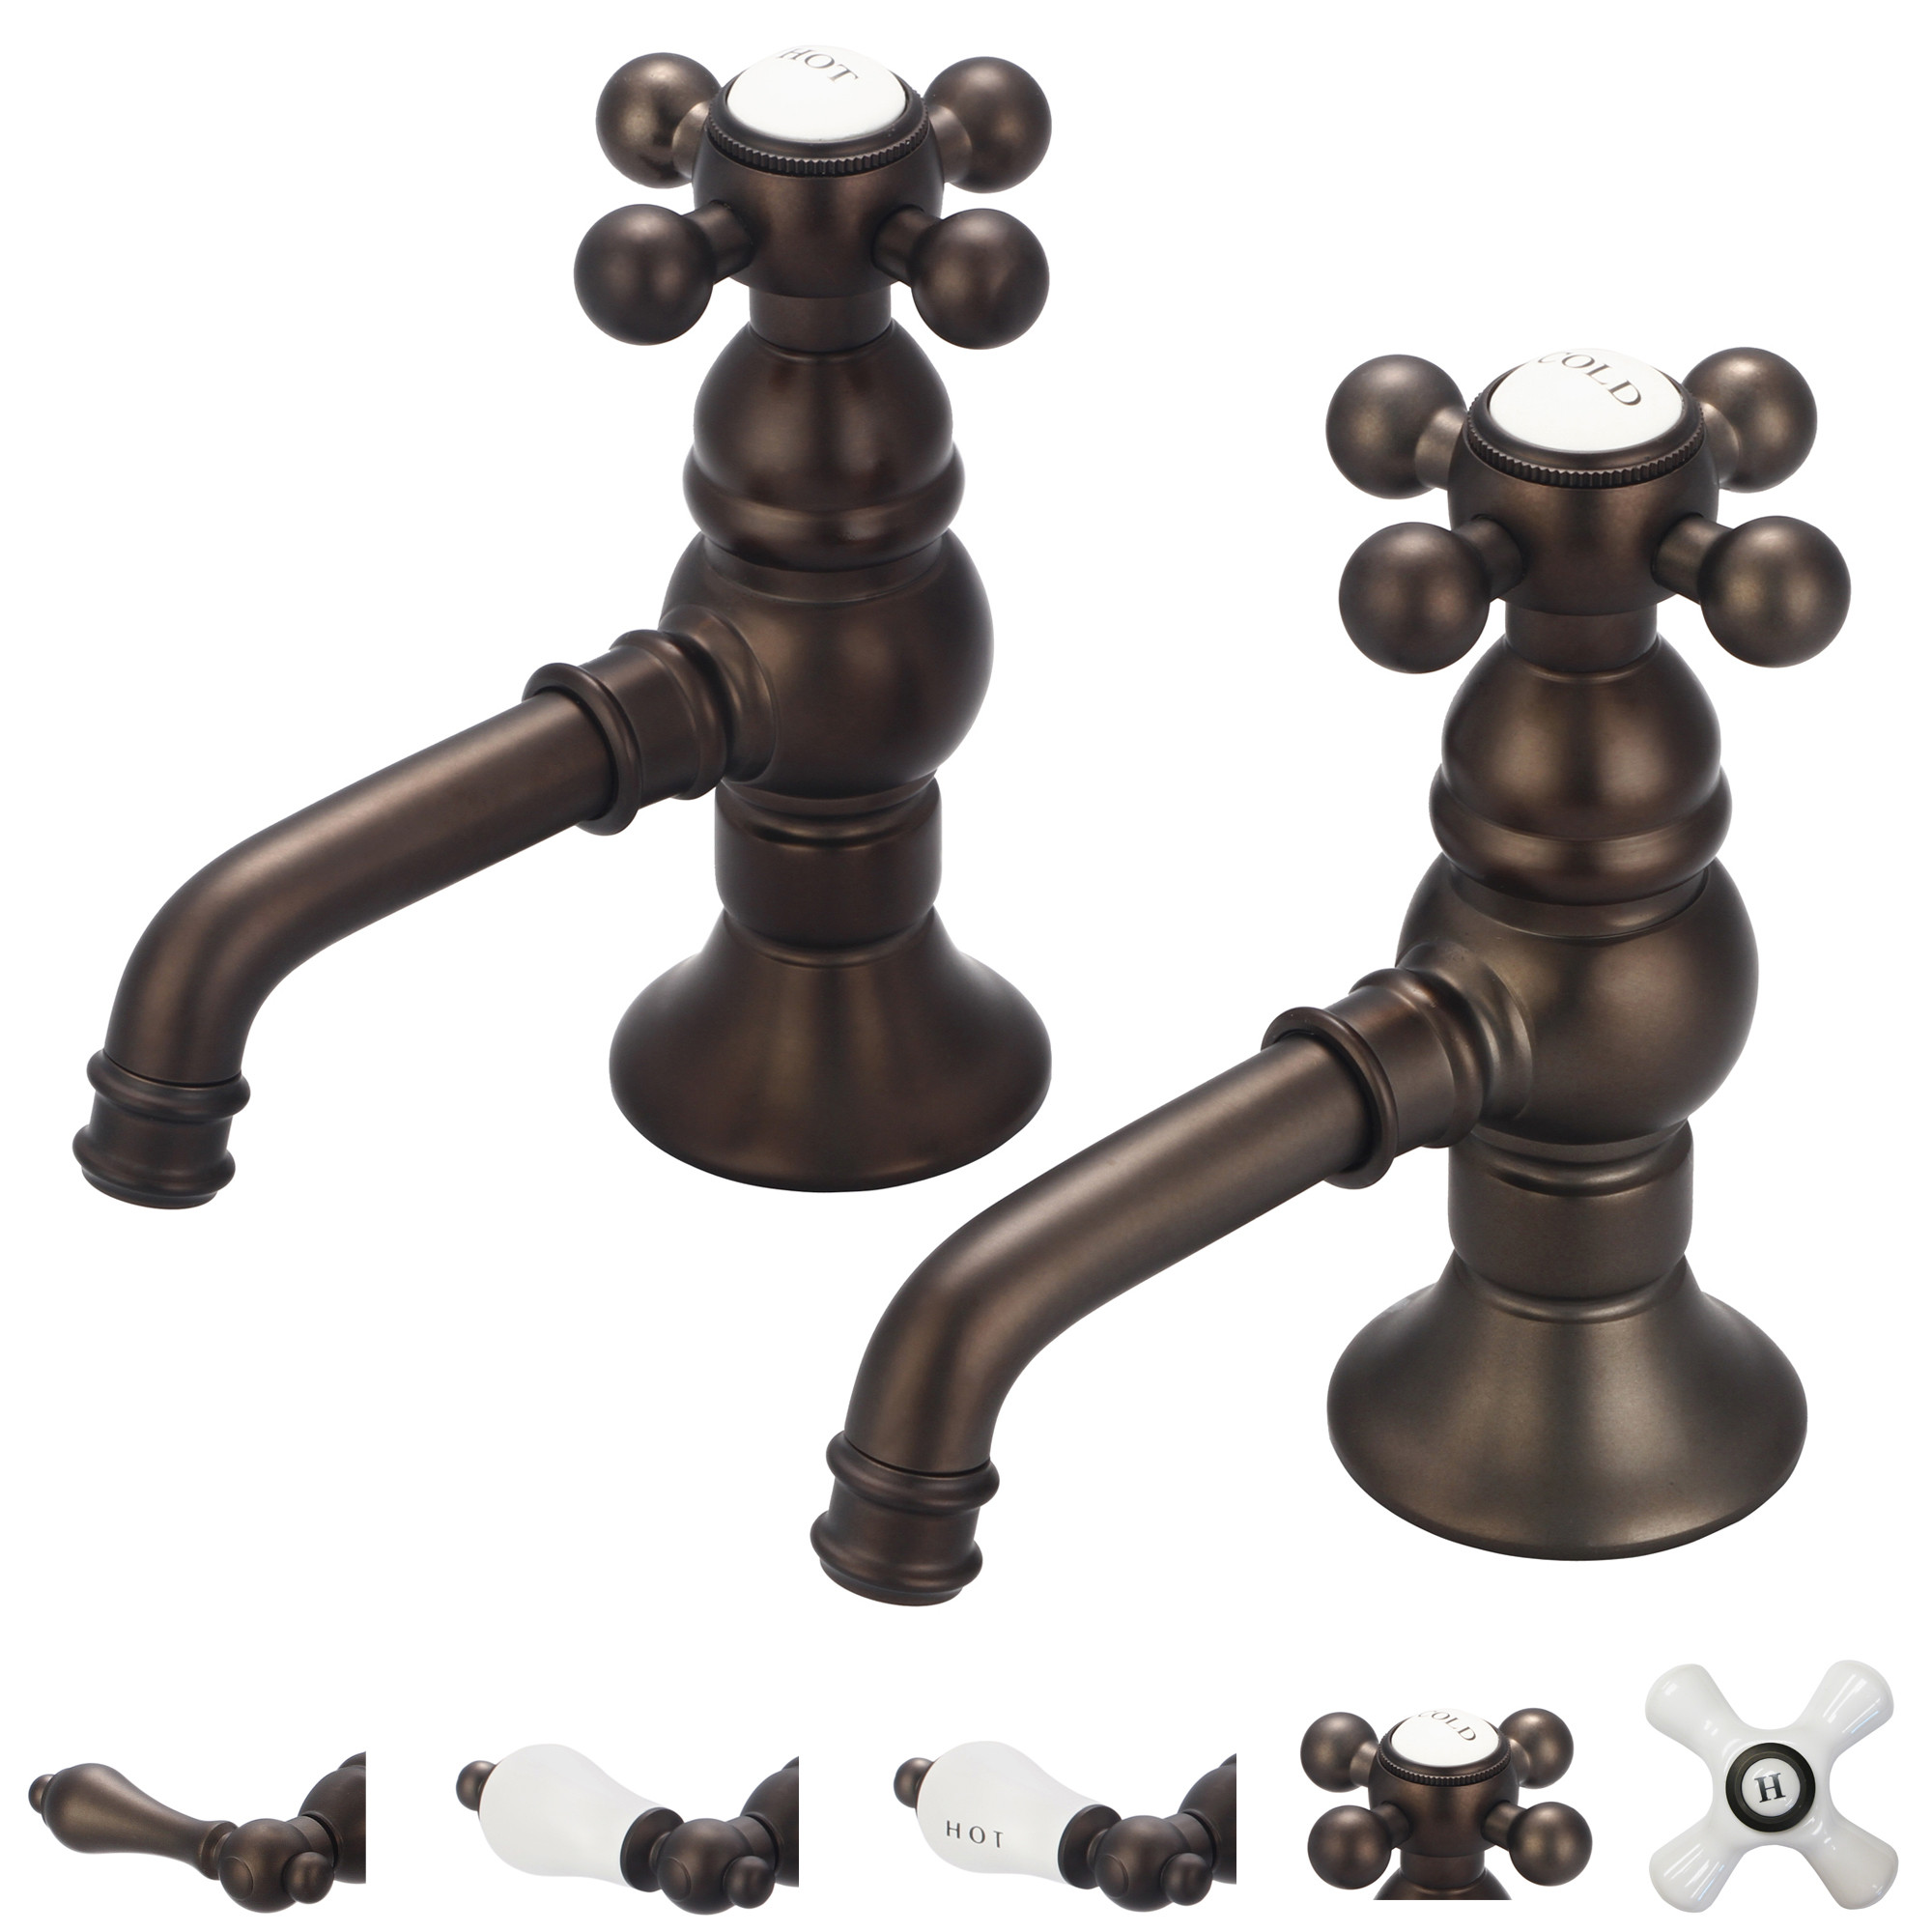 Water Creation F1-0002-03-PX Oil Rubbed Bronze Finish Widespread Faucet, Image Shown with Cross Handle